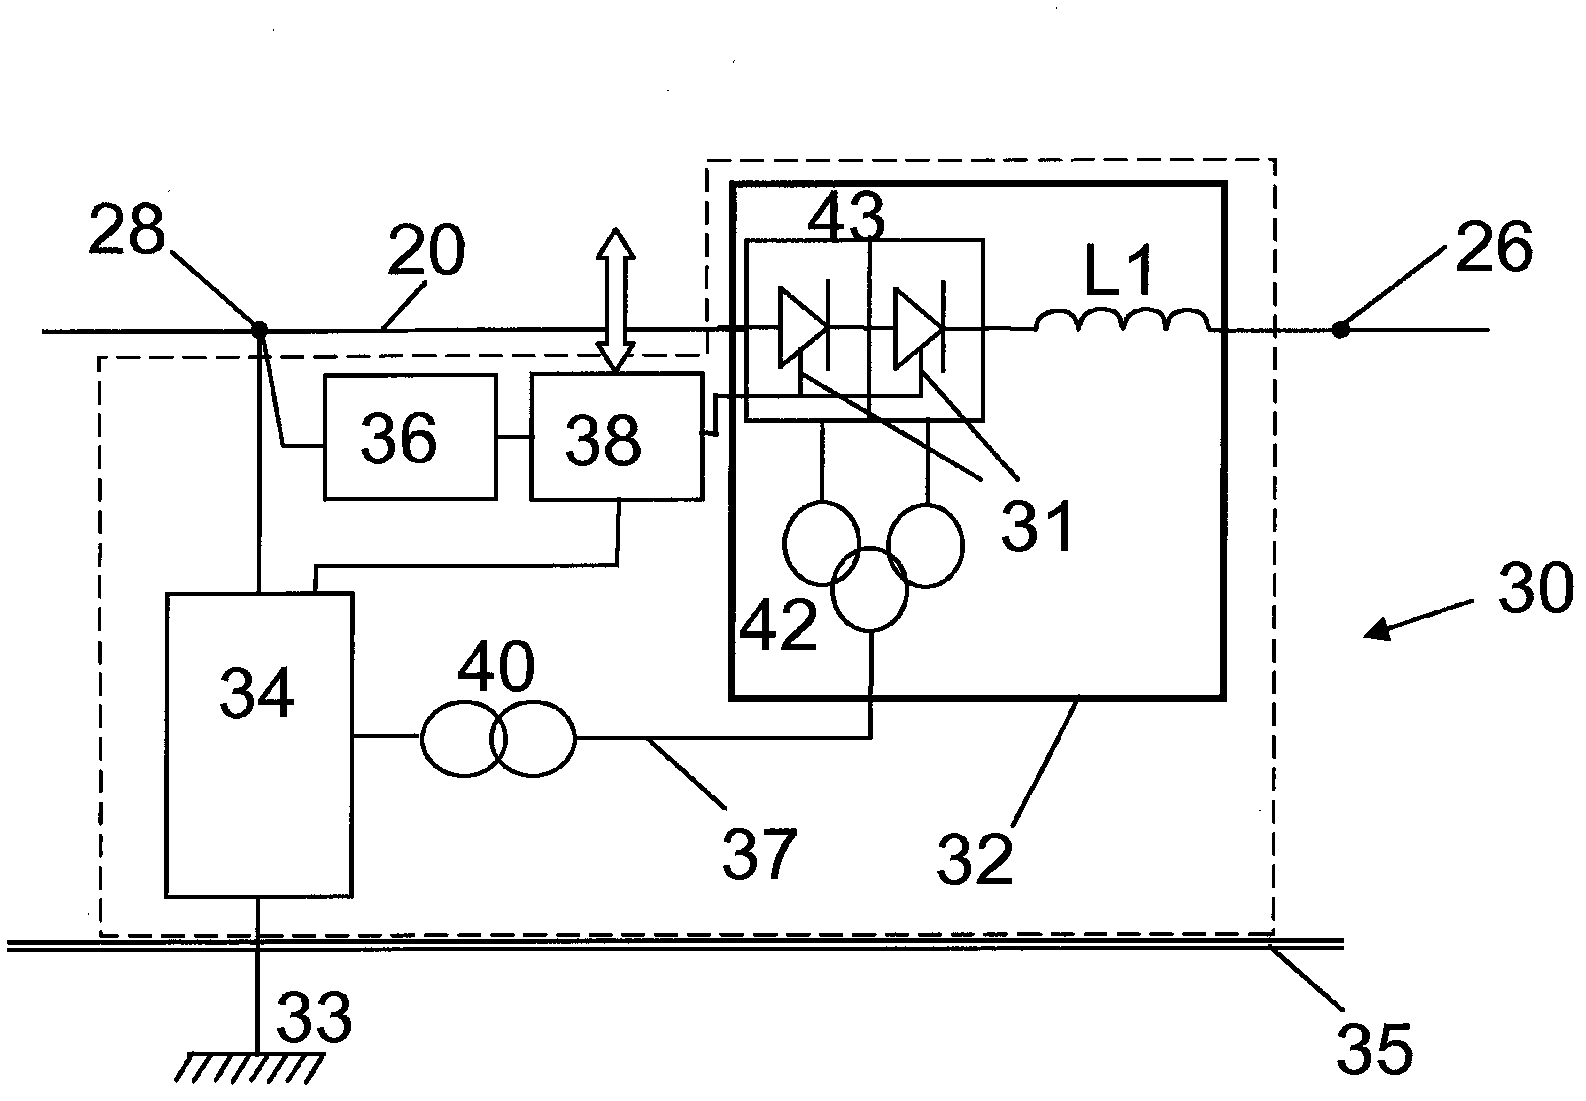 Power flow control in a meshed HVDC power transmission network